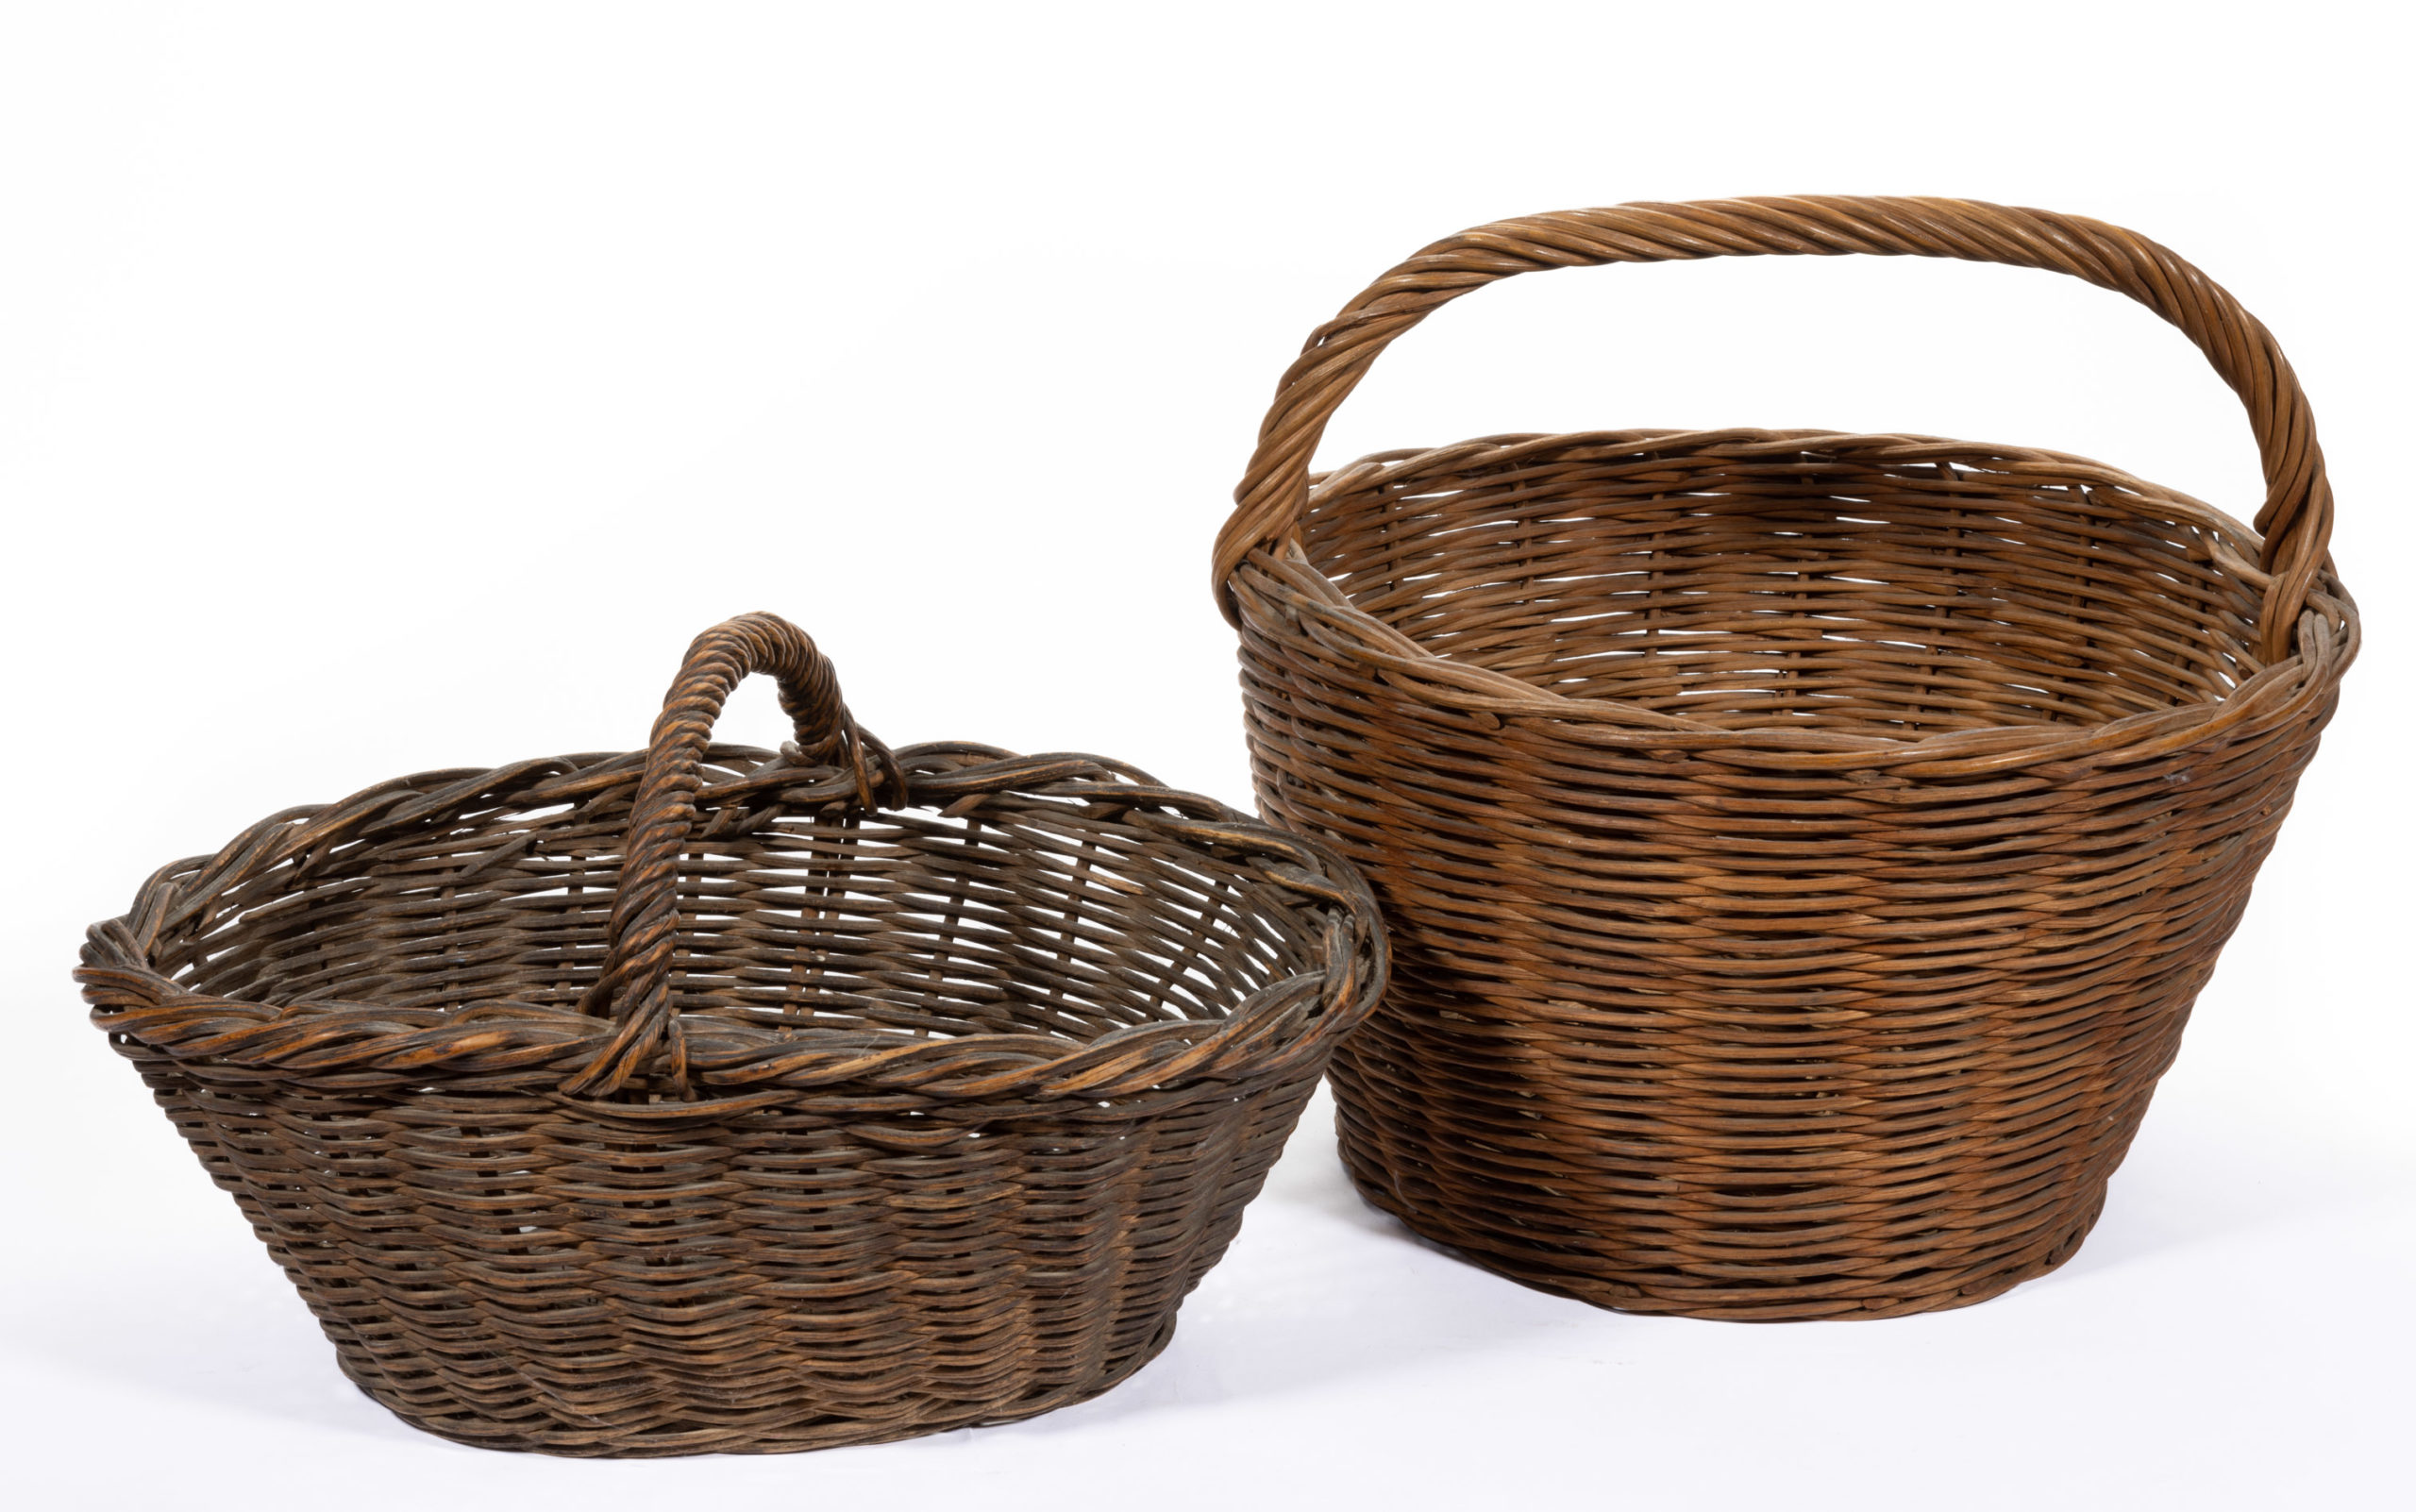 SHENANDOAH VALLEY OF VIRGINIA PULLED-ROD BASKETS, LOT OF TWO,